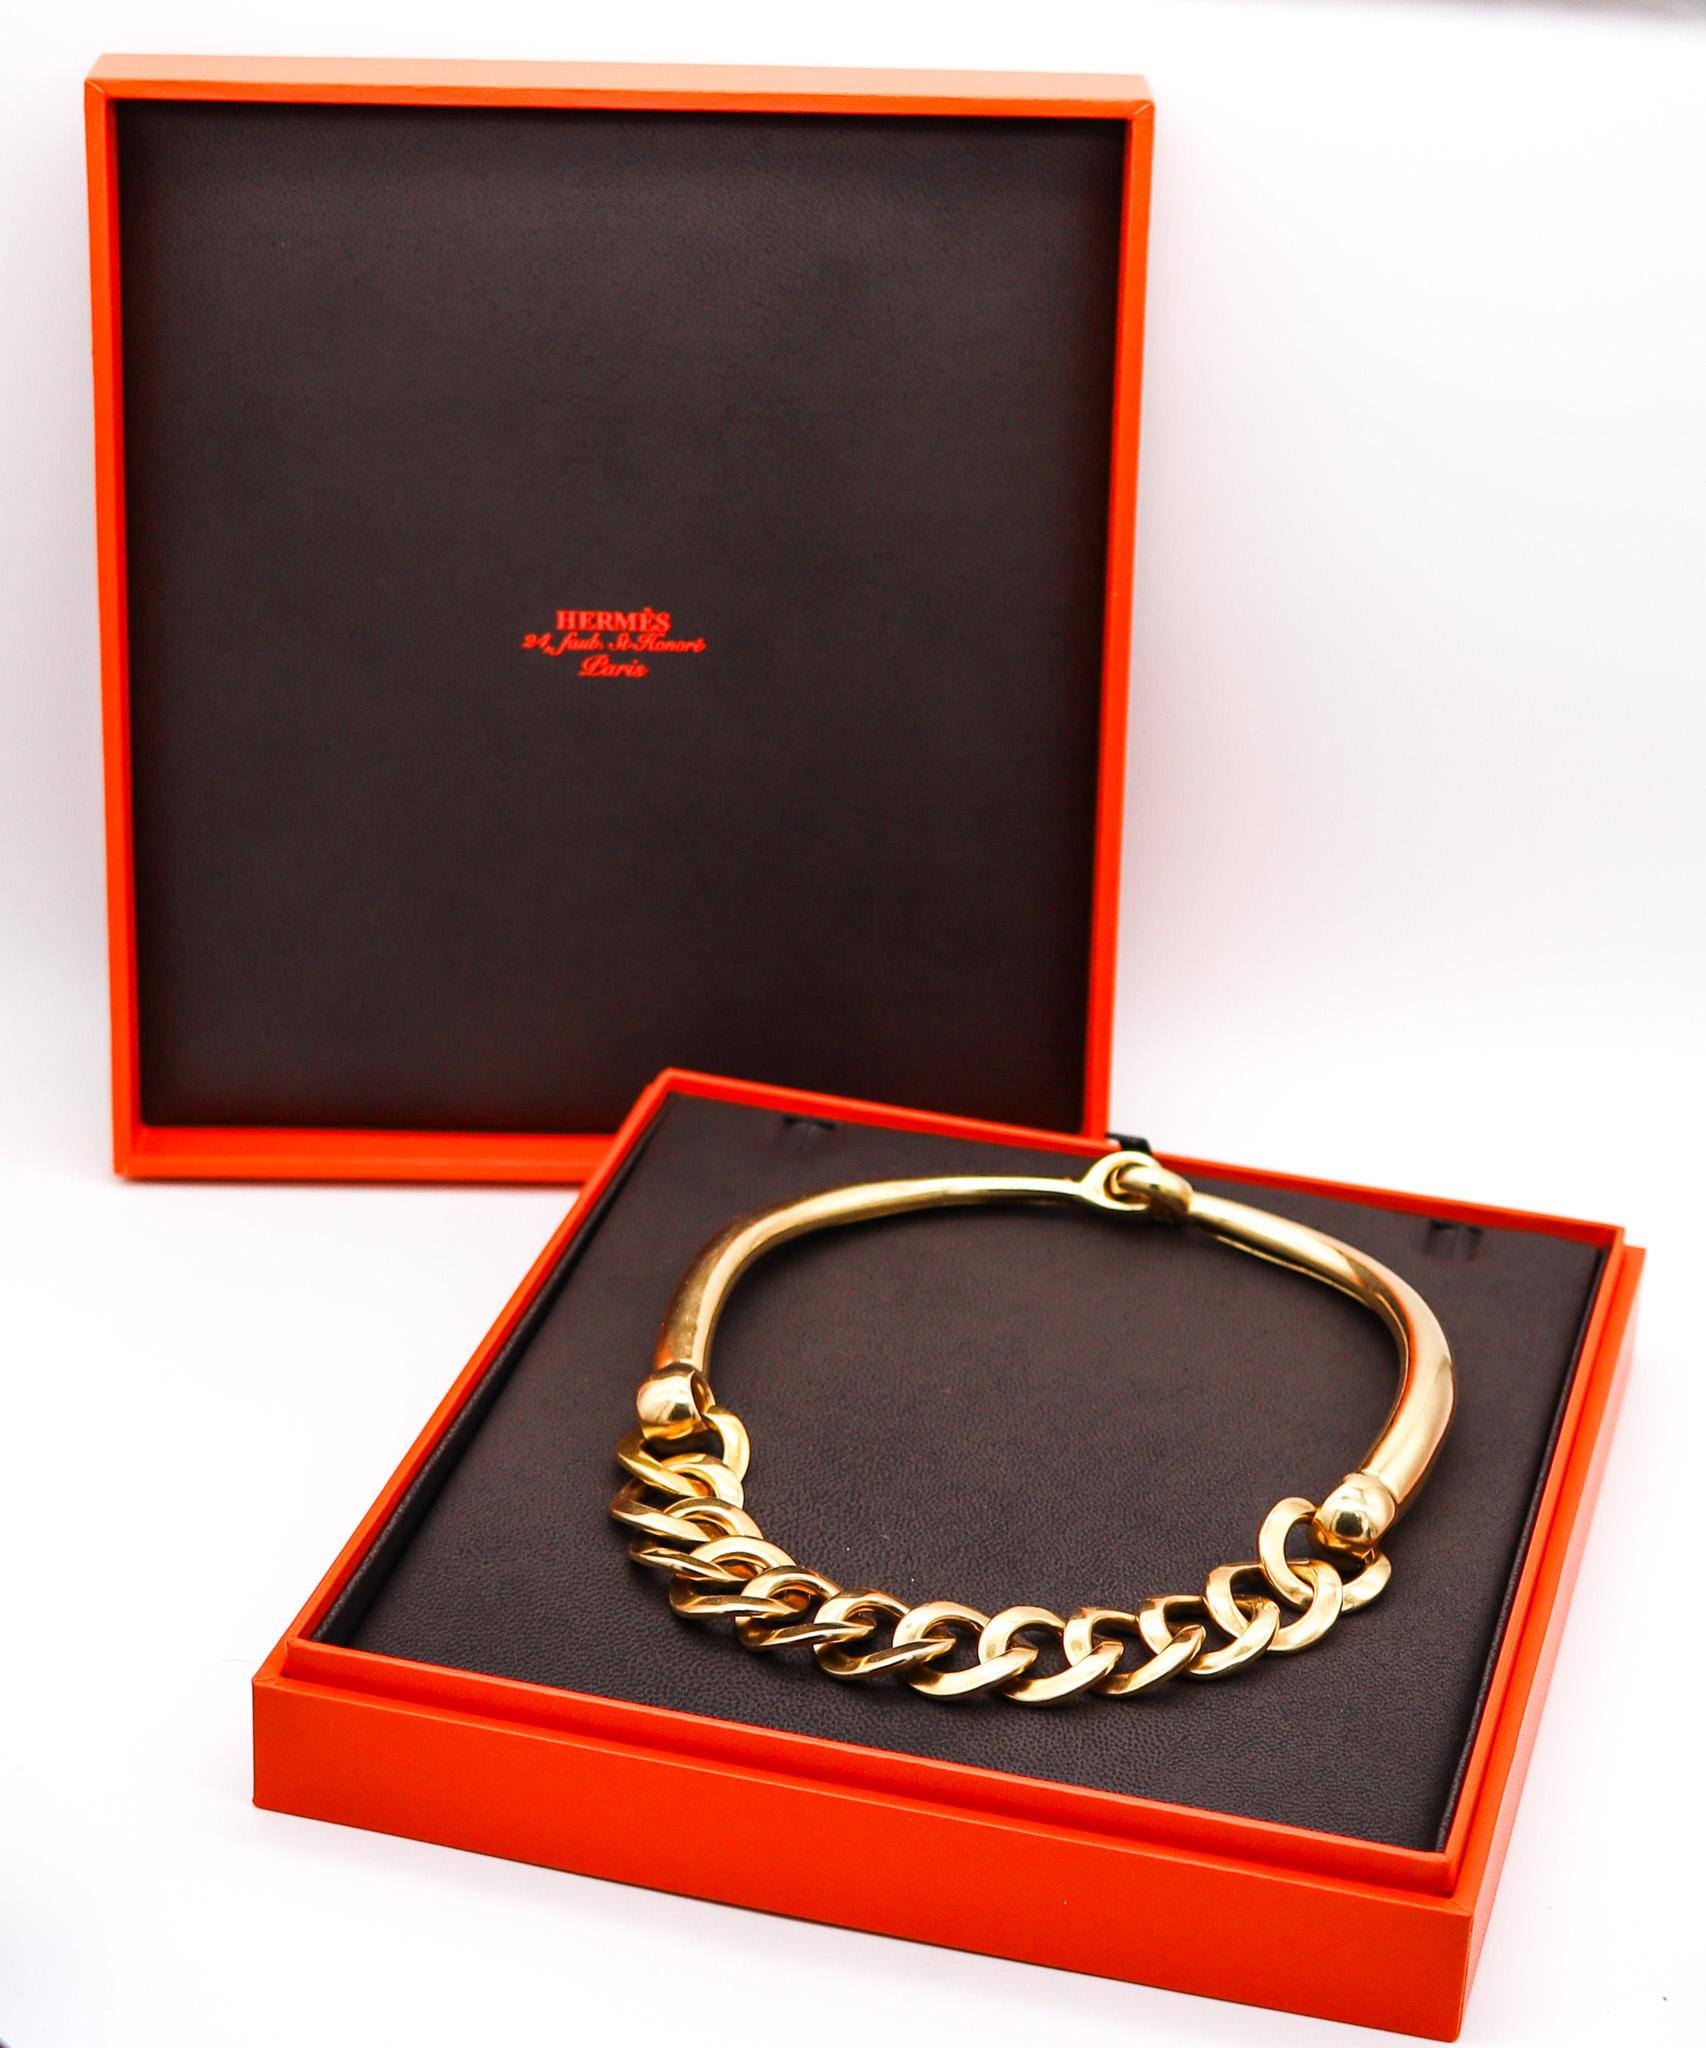 Birkin necklace designed by Hermès.

An exceptional and extremely rare necklace, created in Paris France by the luxury house of Hermès, back in the 1970's. This fantastic chained collar is very artistic, of great statement and a superb piece of